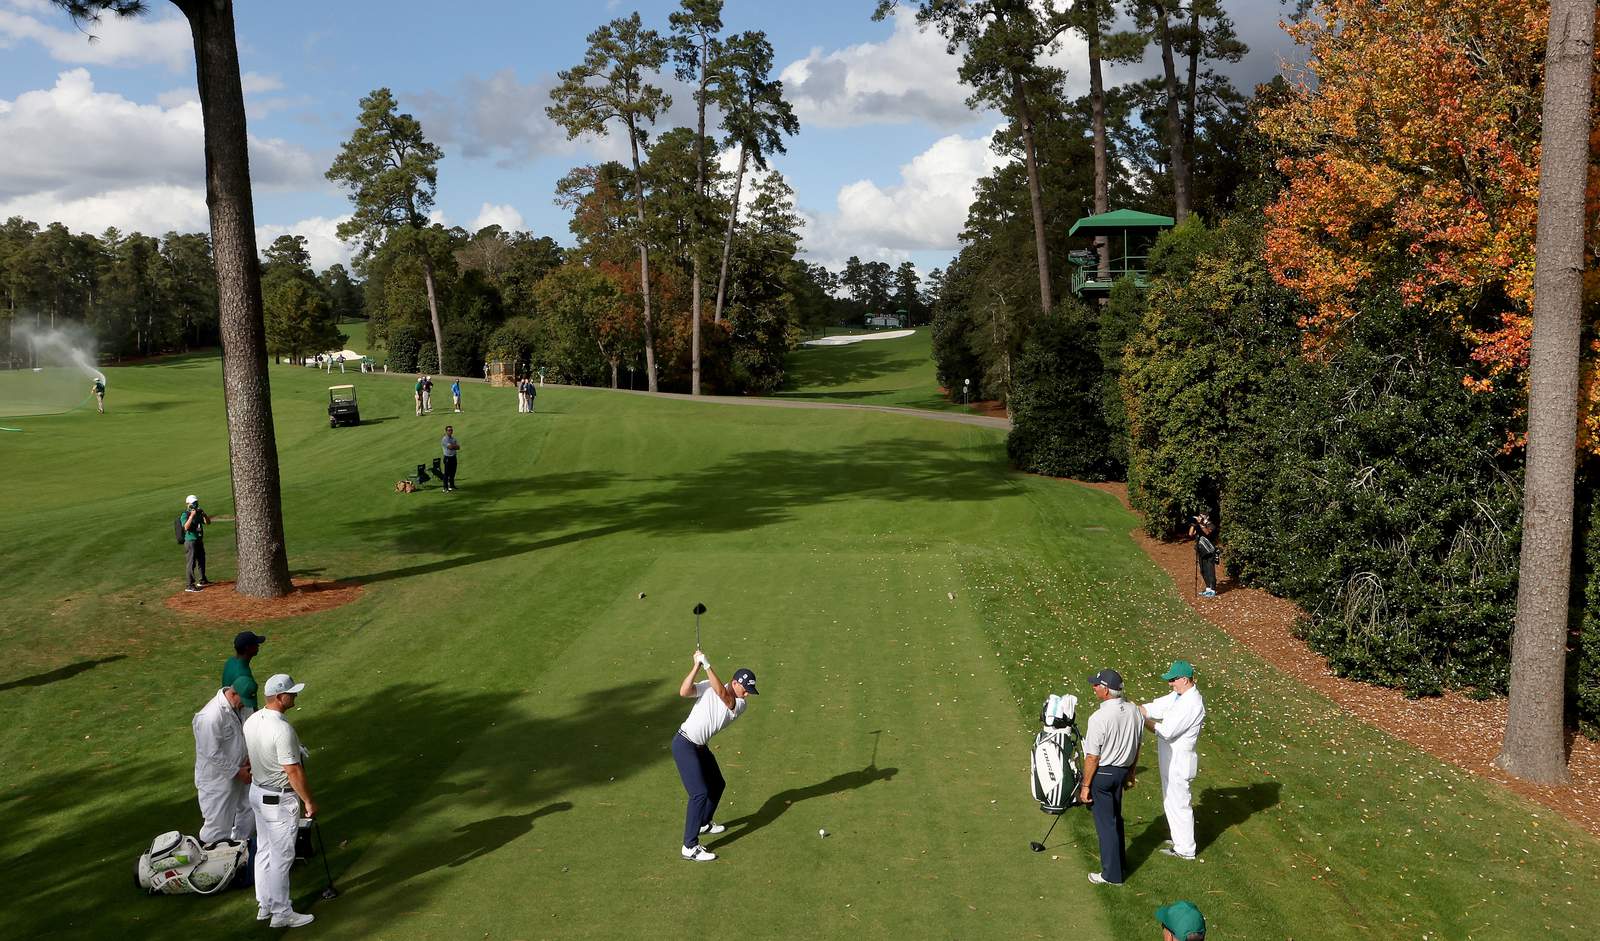 Augusta National in November? 5 reasons why this year’s Masters will stand alone in history